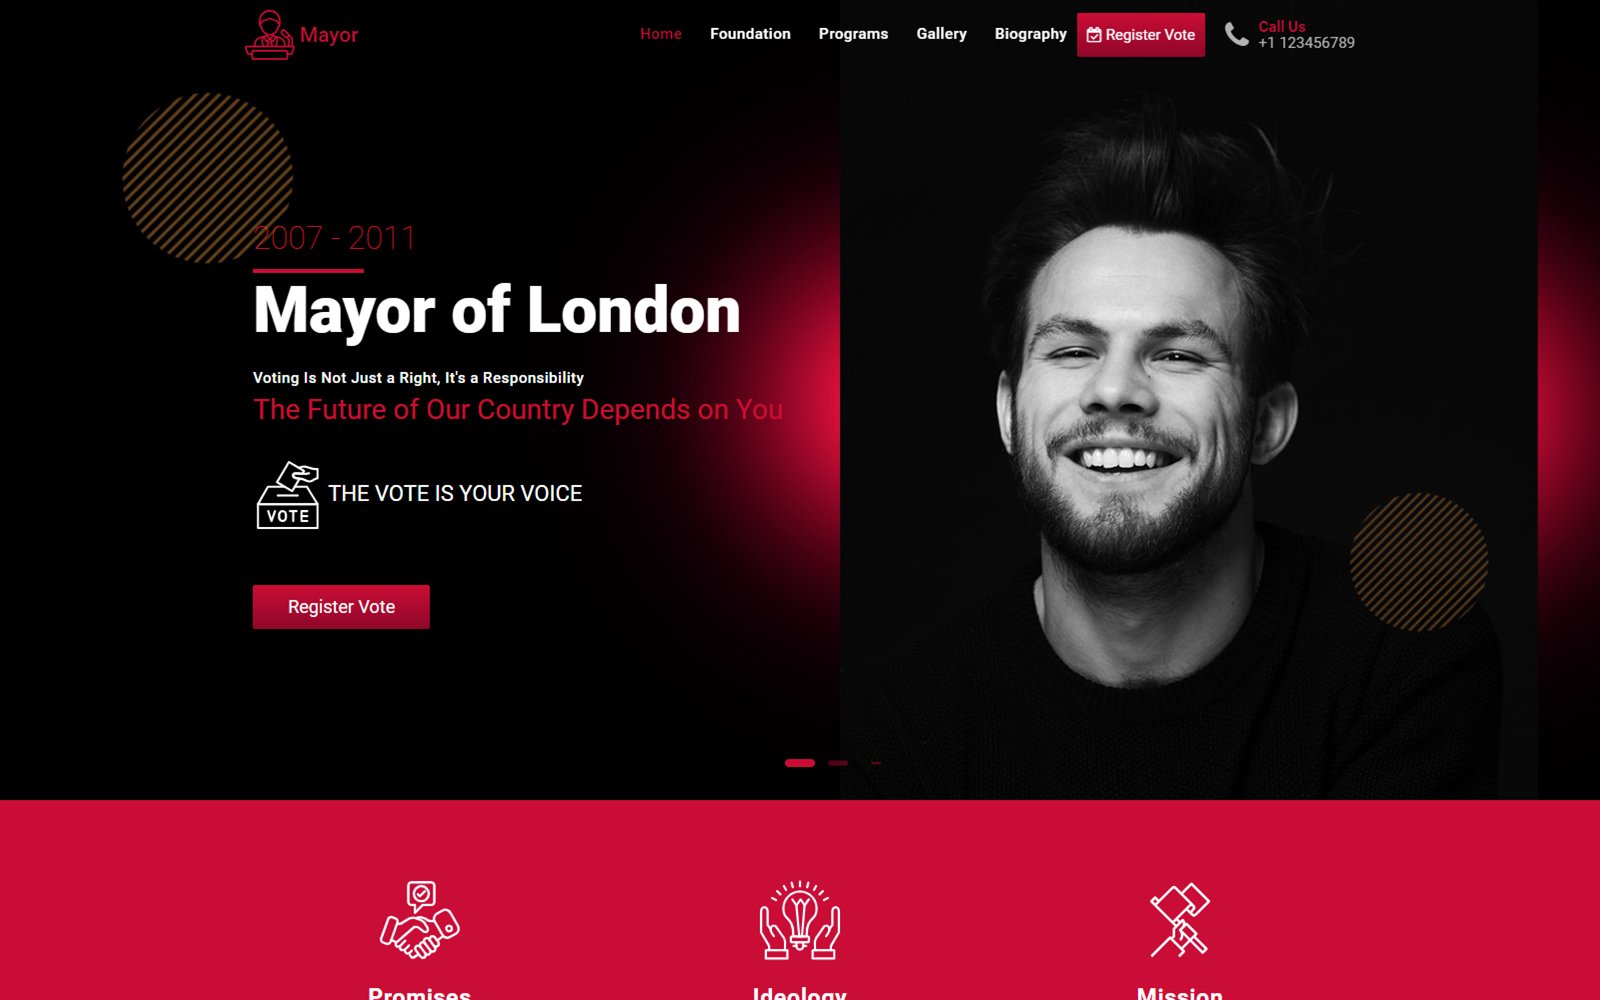 Mayor - Political Candidate Landing Page Template